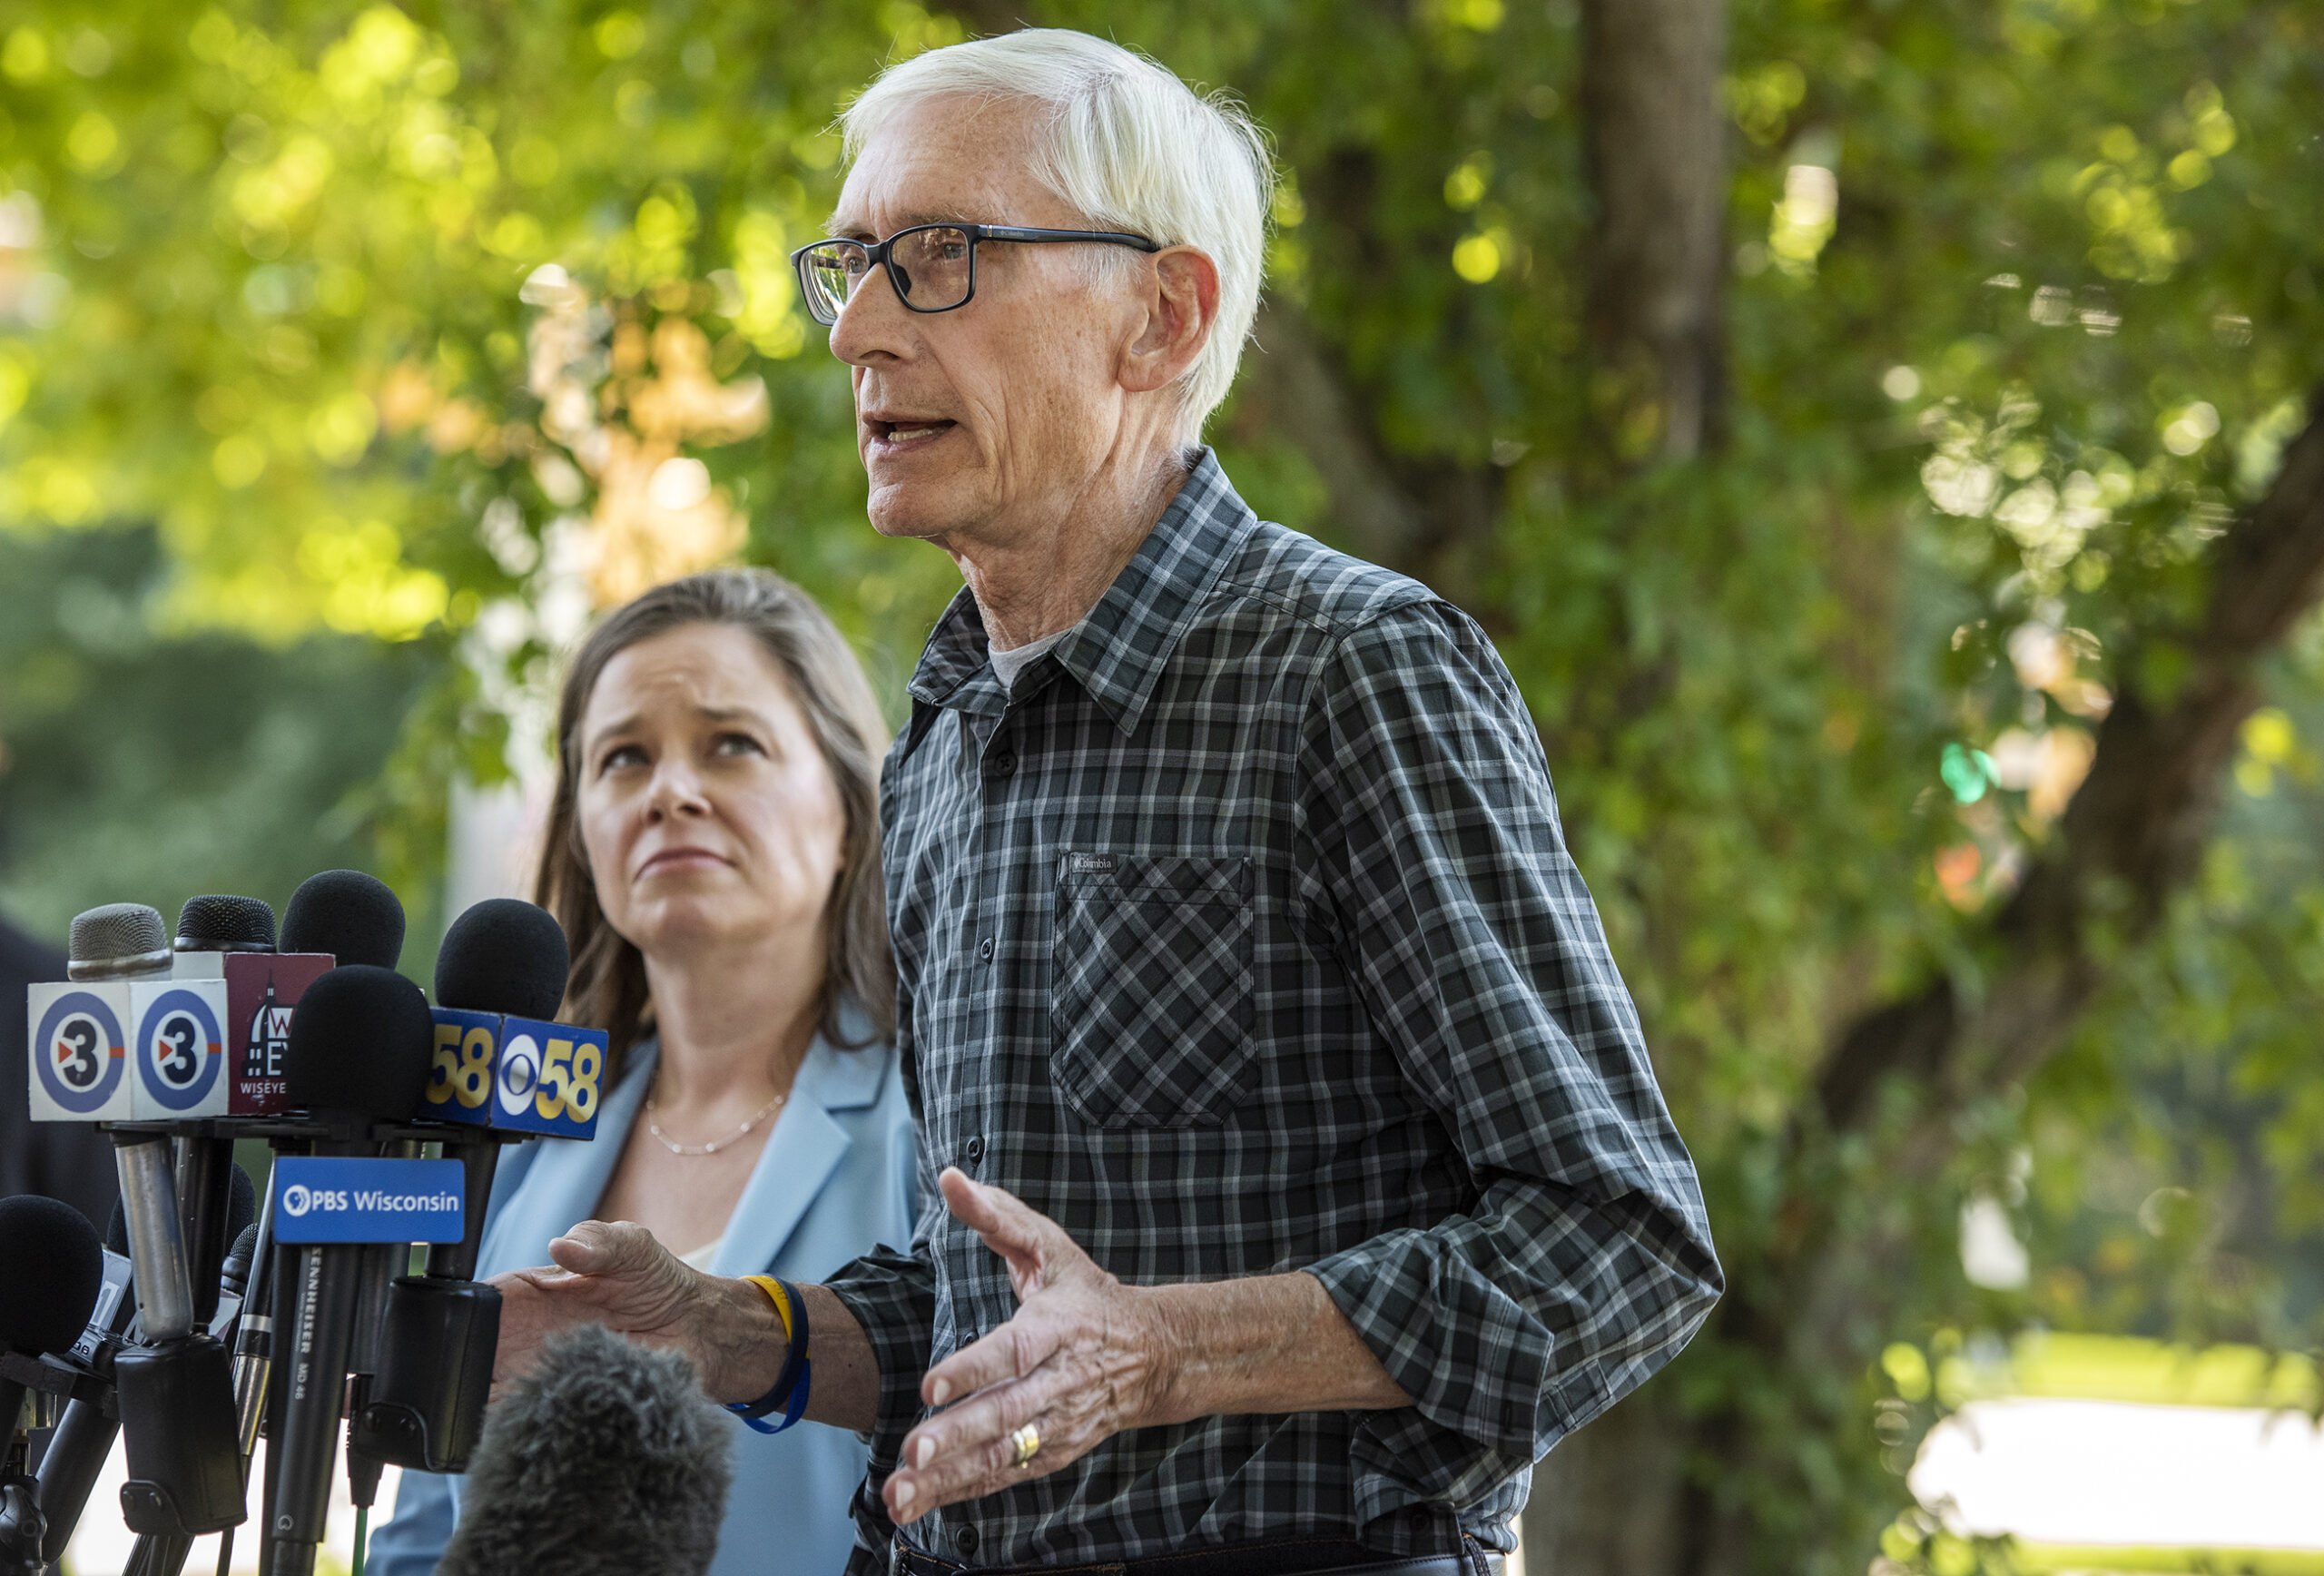 Gov. Tony Evers and Sara Rodriguez speak to reporters outside in front of microphones.